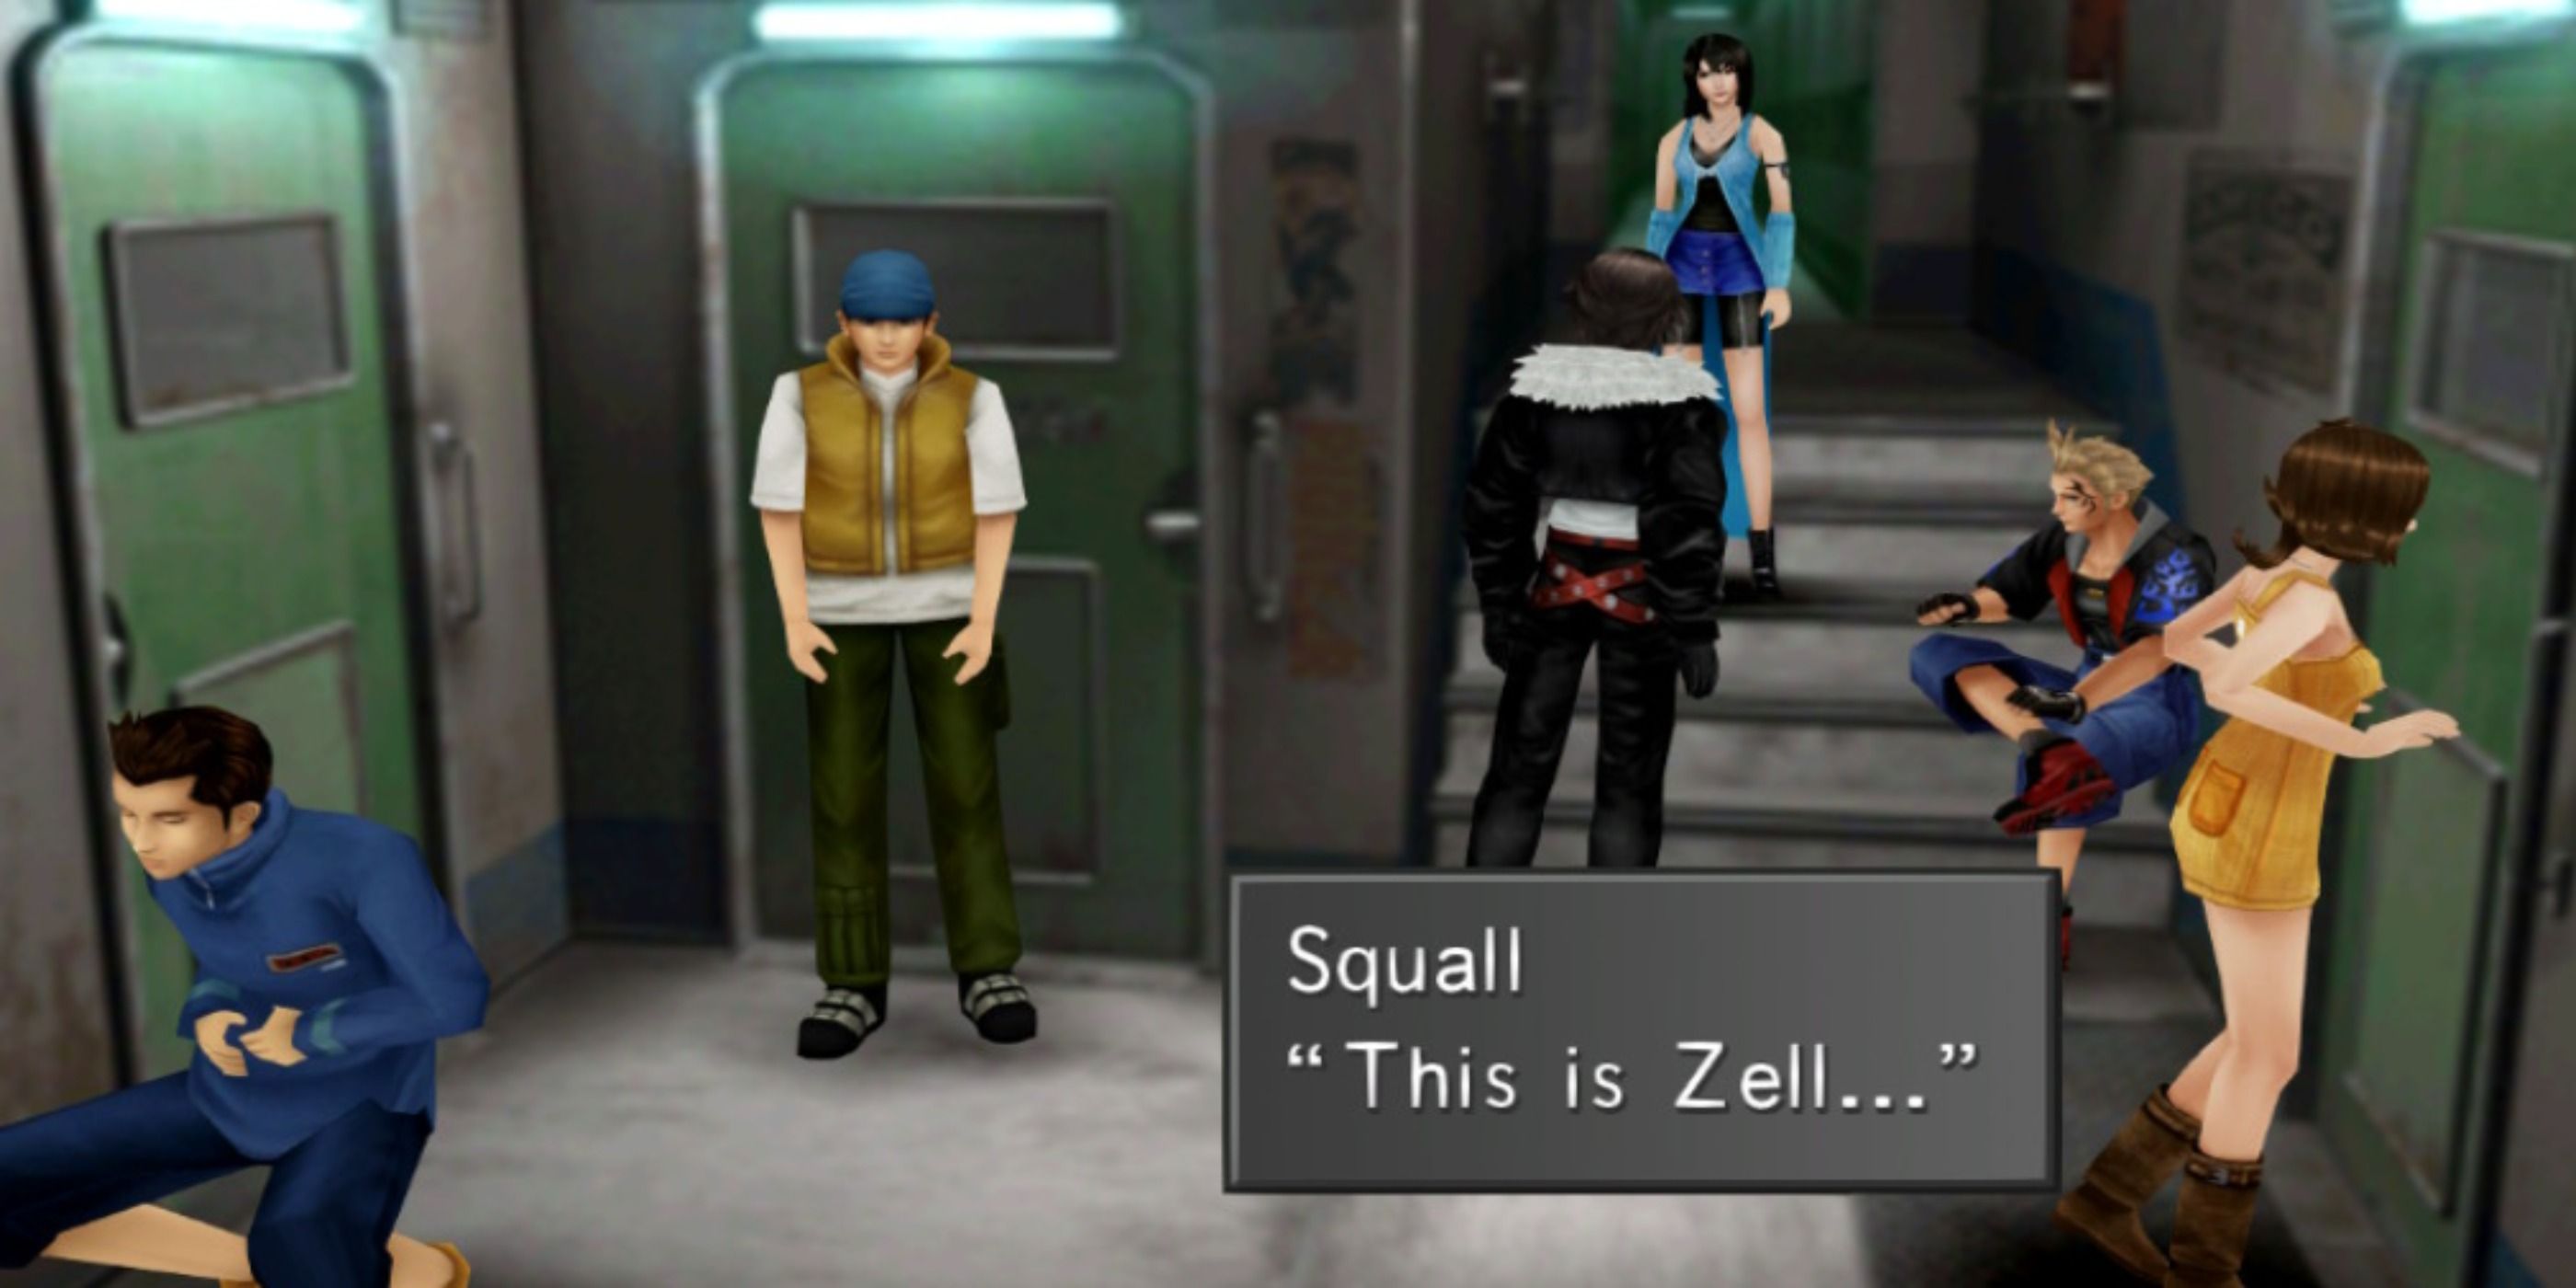 Final Fantasy 8 Remastered Squall Introduces Rinoa To Zell And Selphie